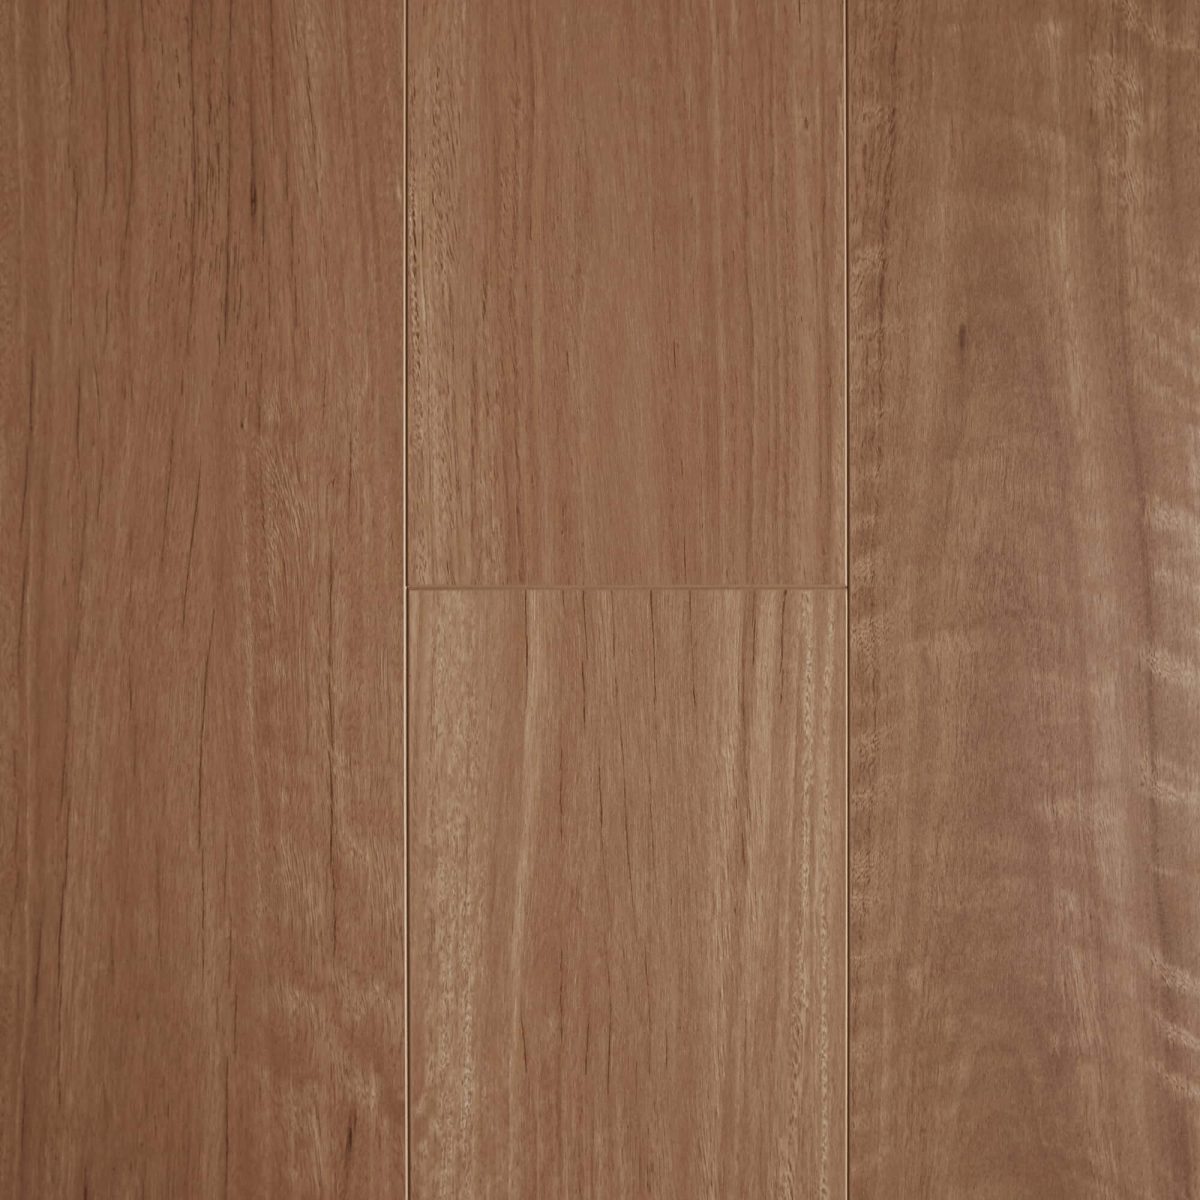 Aged Spotted Gum